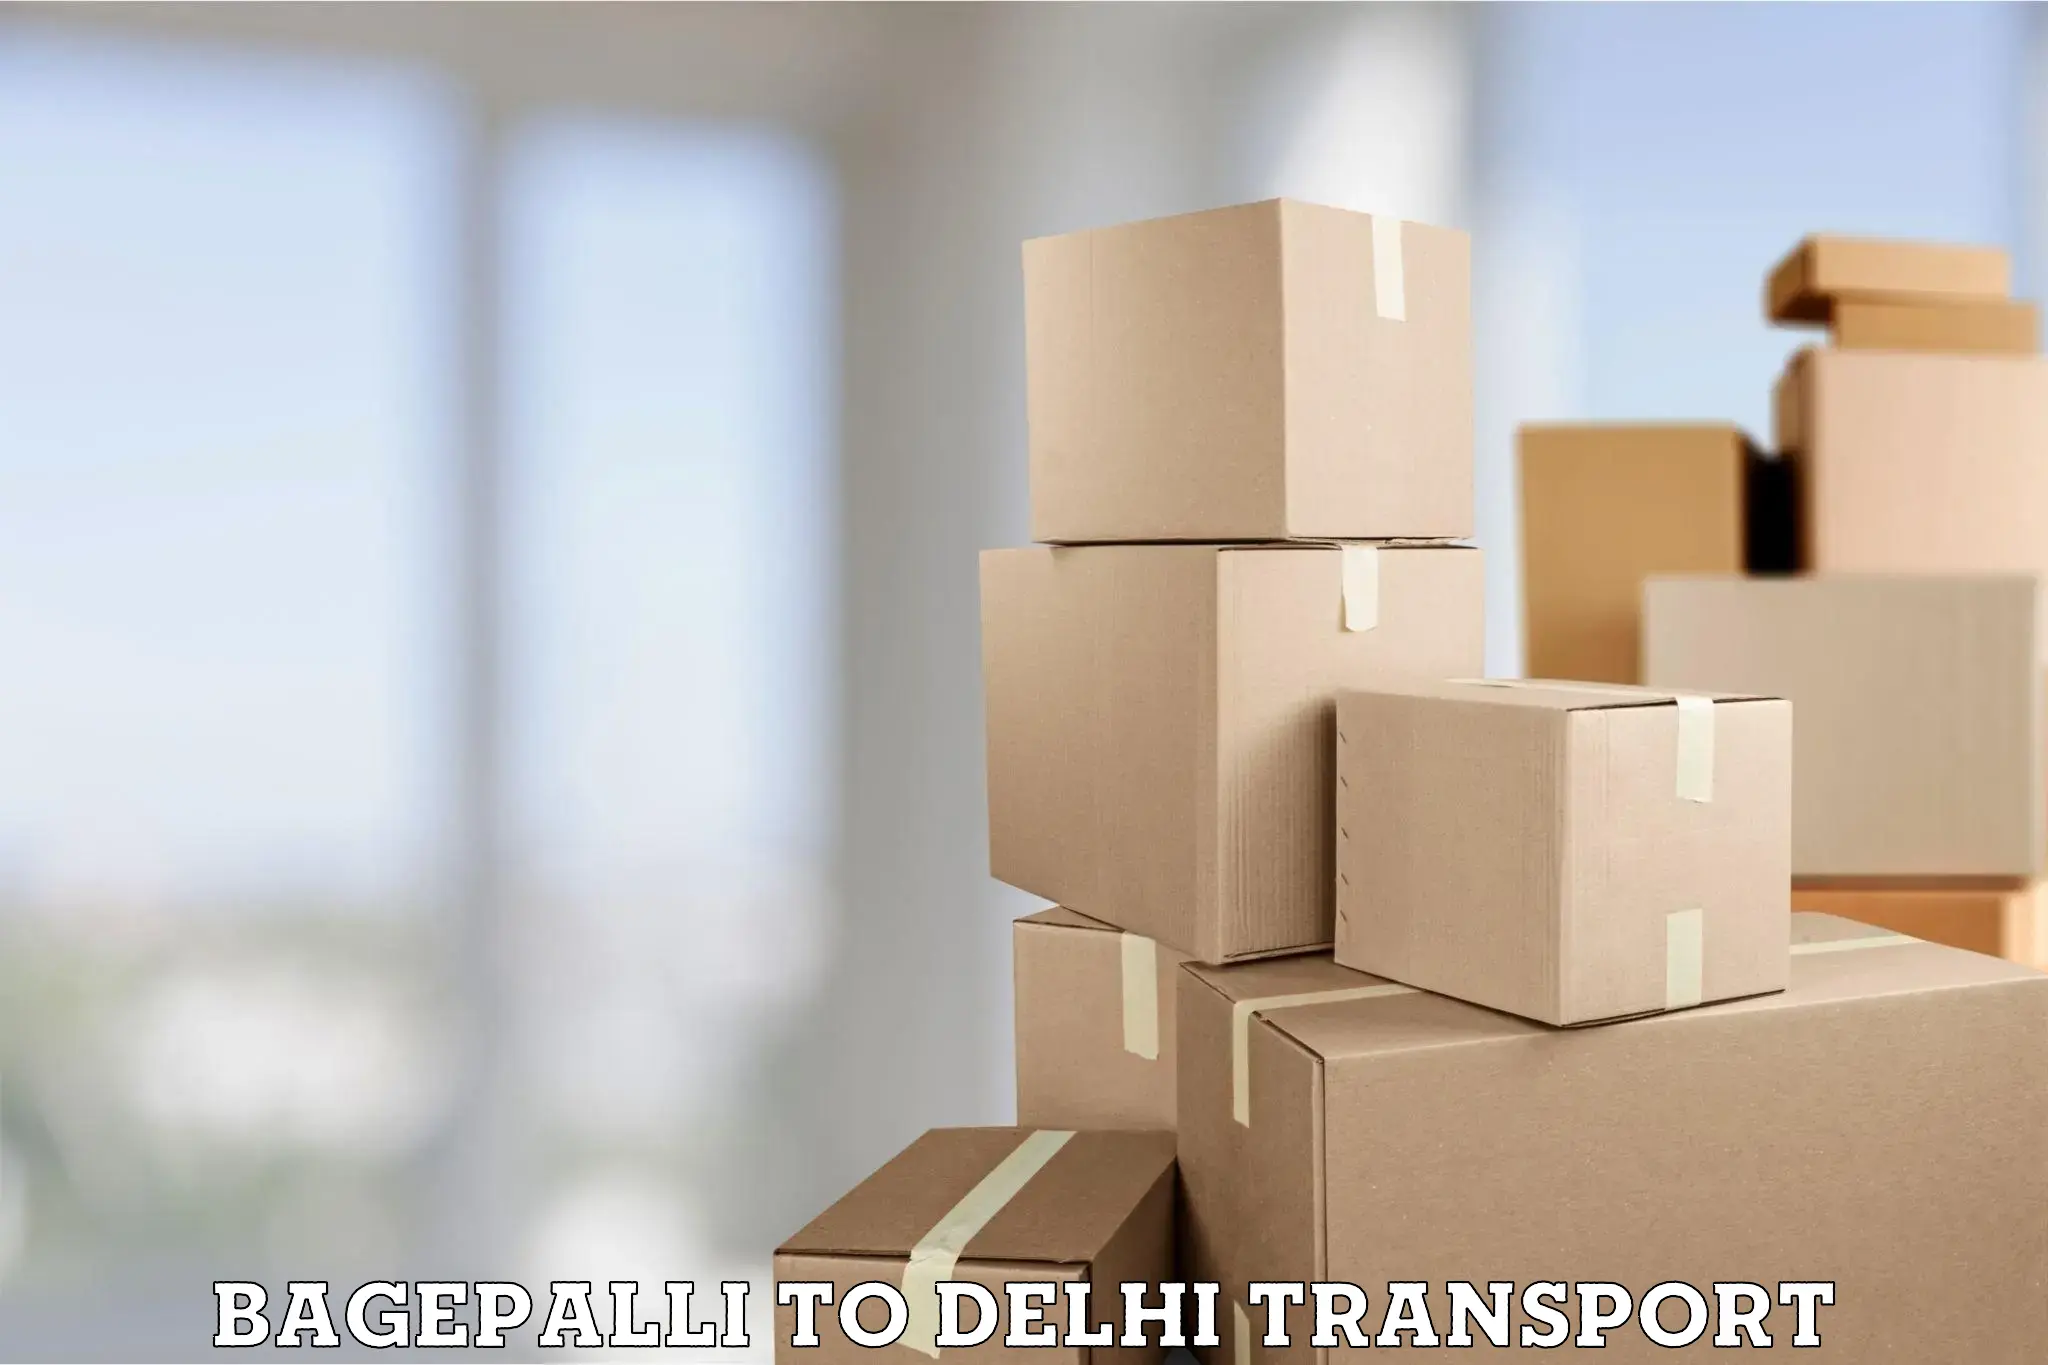 Truck transport companies in India in Bagepalli to NCR